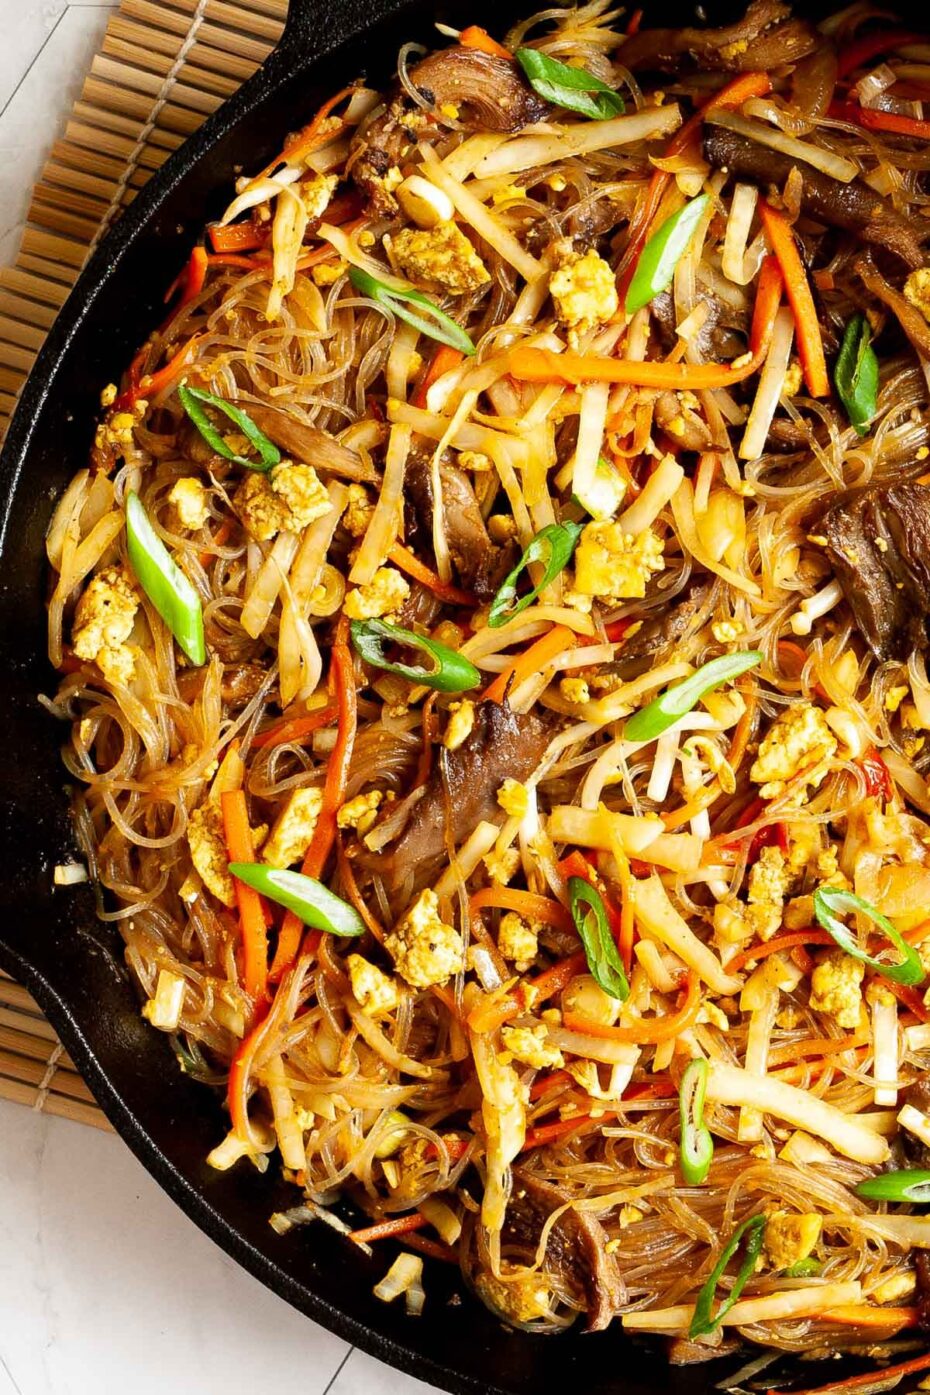 Black skillet from above full of glass noodles, shredded carrots, cabbage, sliced green onion, bean sprouts, mushroom shreds